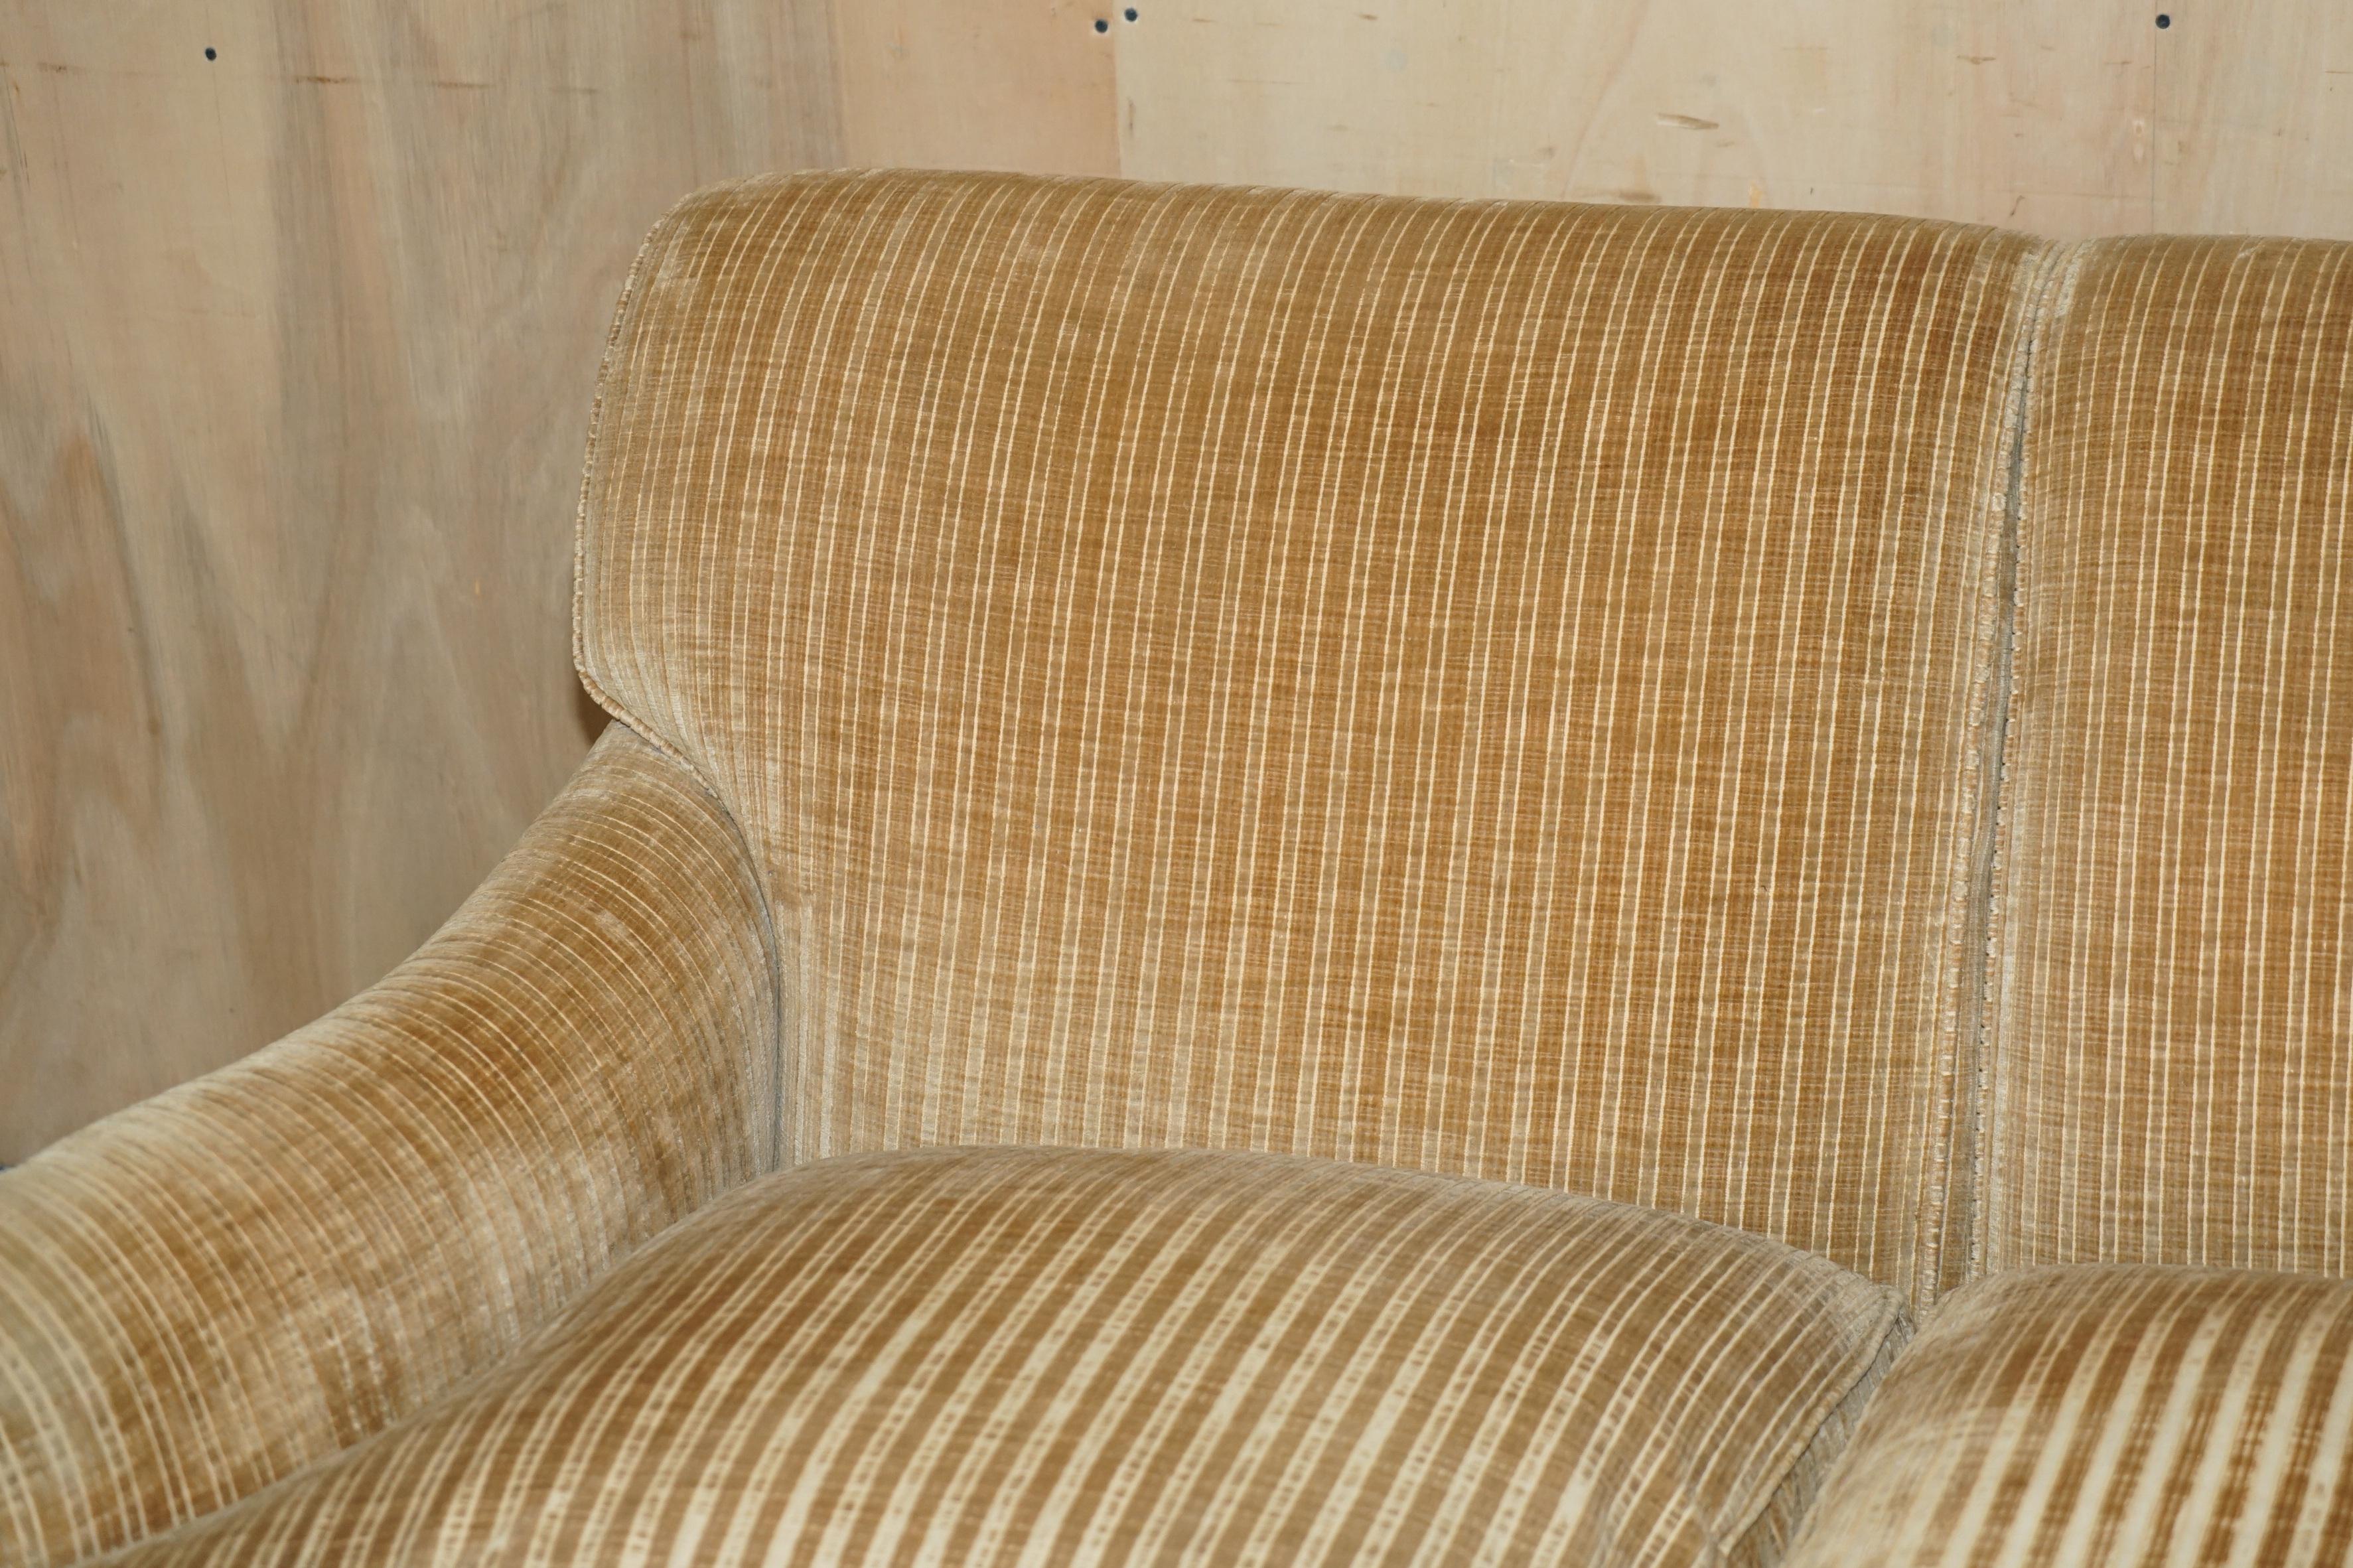 Victorian LOVELY HOWARD & SON'S / CHAIRS LTD TWO SEAT SOFA FEATHER FILLED SEAT CUSHIONs For Sale